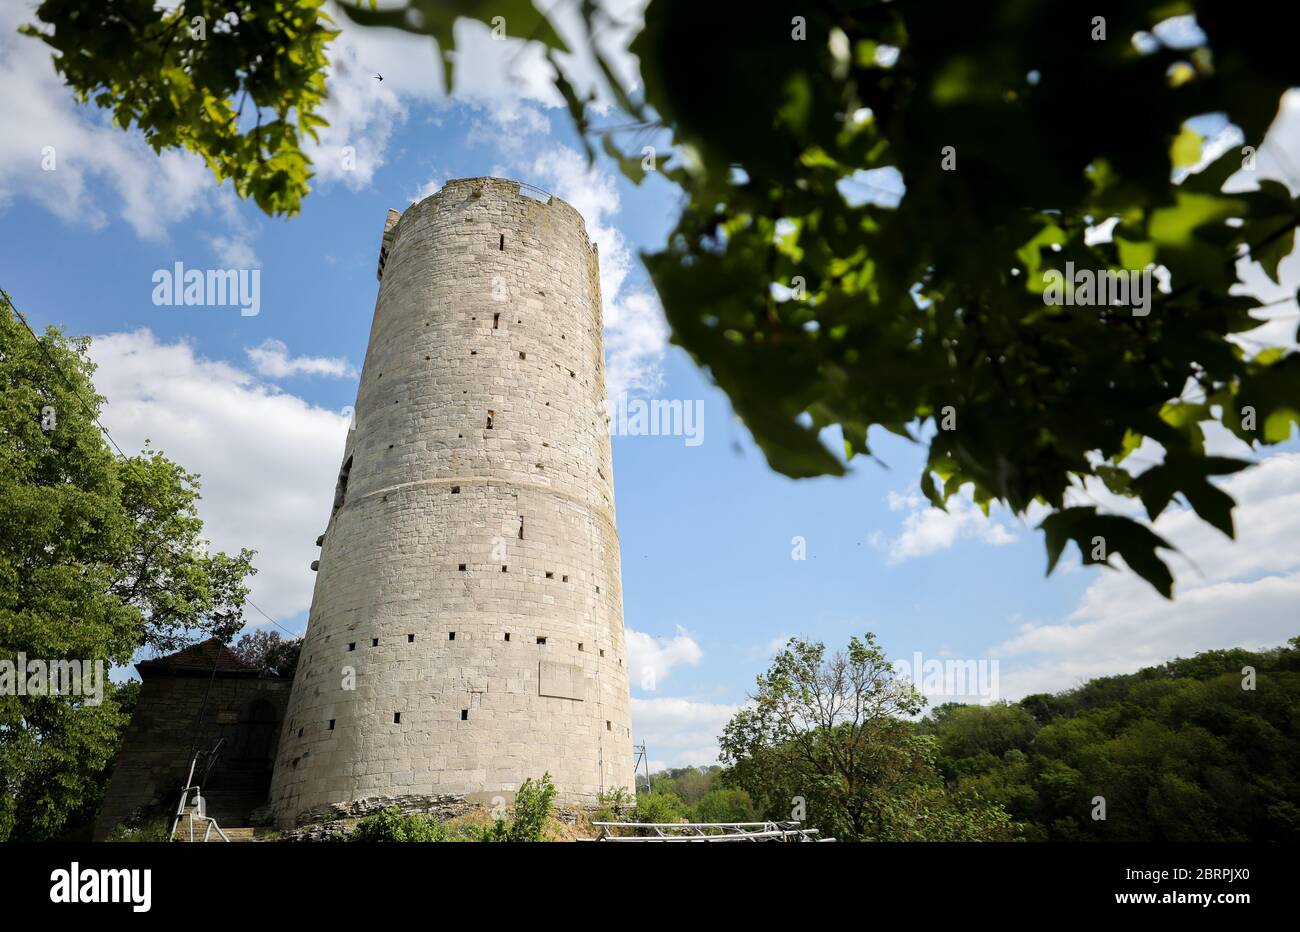 15 May 2020, Saxony-Anhalt, Bad Kösen: View of the Saaleck Castle. The castle ruins and the neighbouring Rudelsburg, picturesquely situated above the river Saale, are popular excursion destinations in Saxony-Anhalt. Photo: Jan Woitas/dpa-Zentralbild/ZB Stock Photo